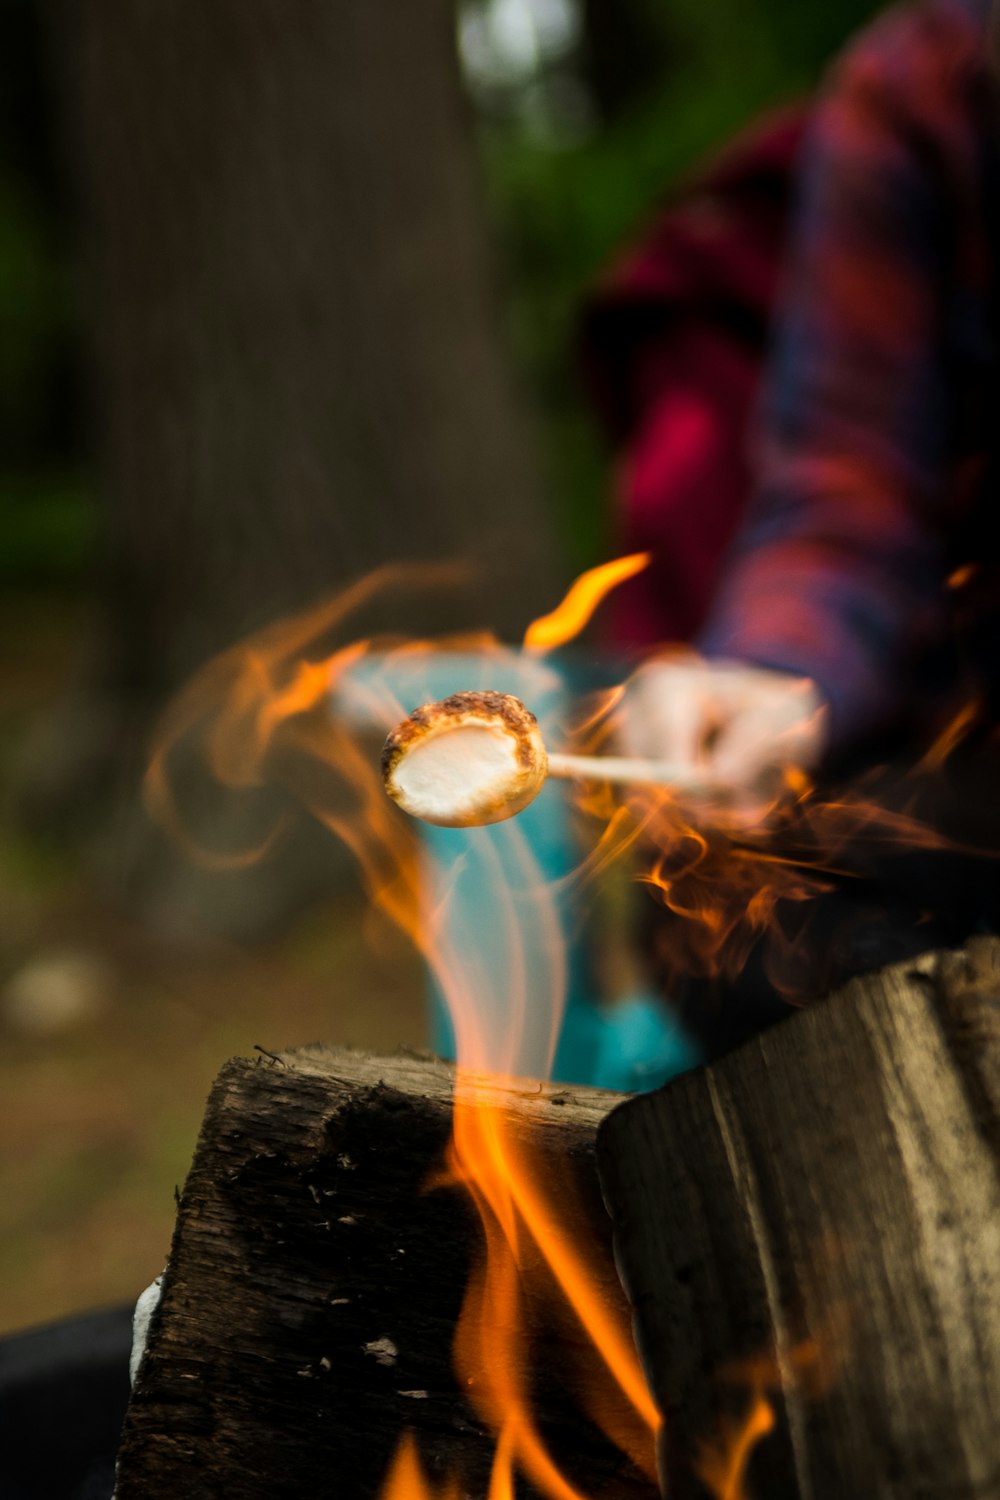 A person in plaid holding a marshmallow out over a fire to roast